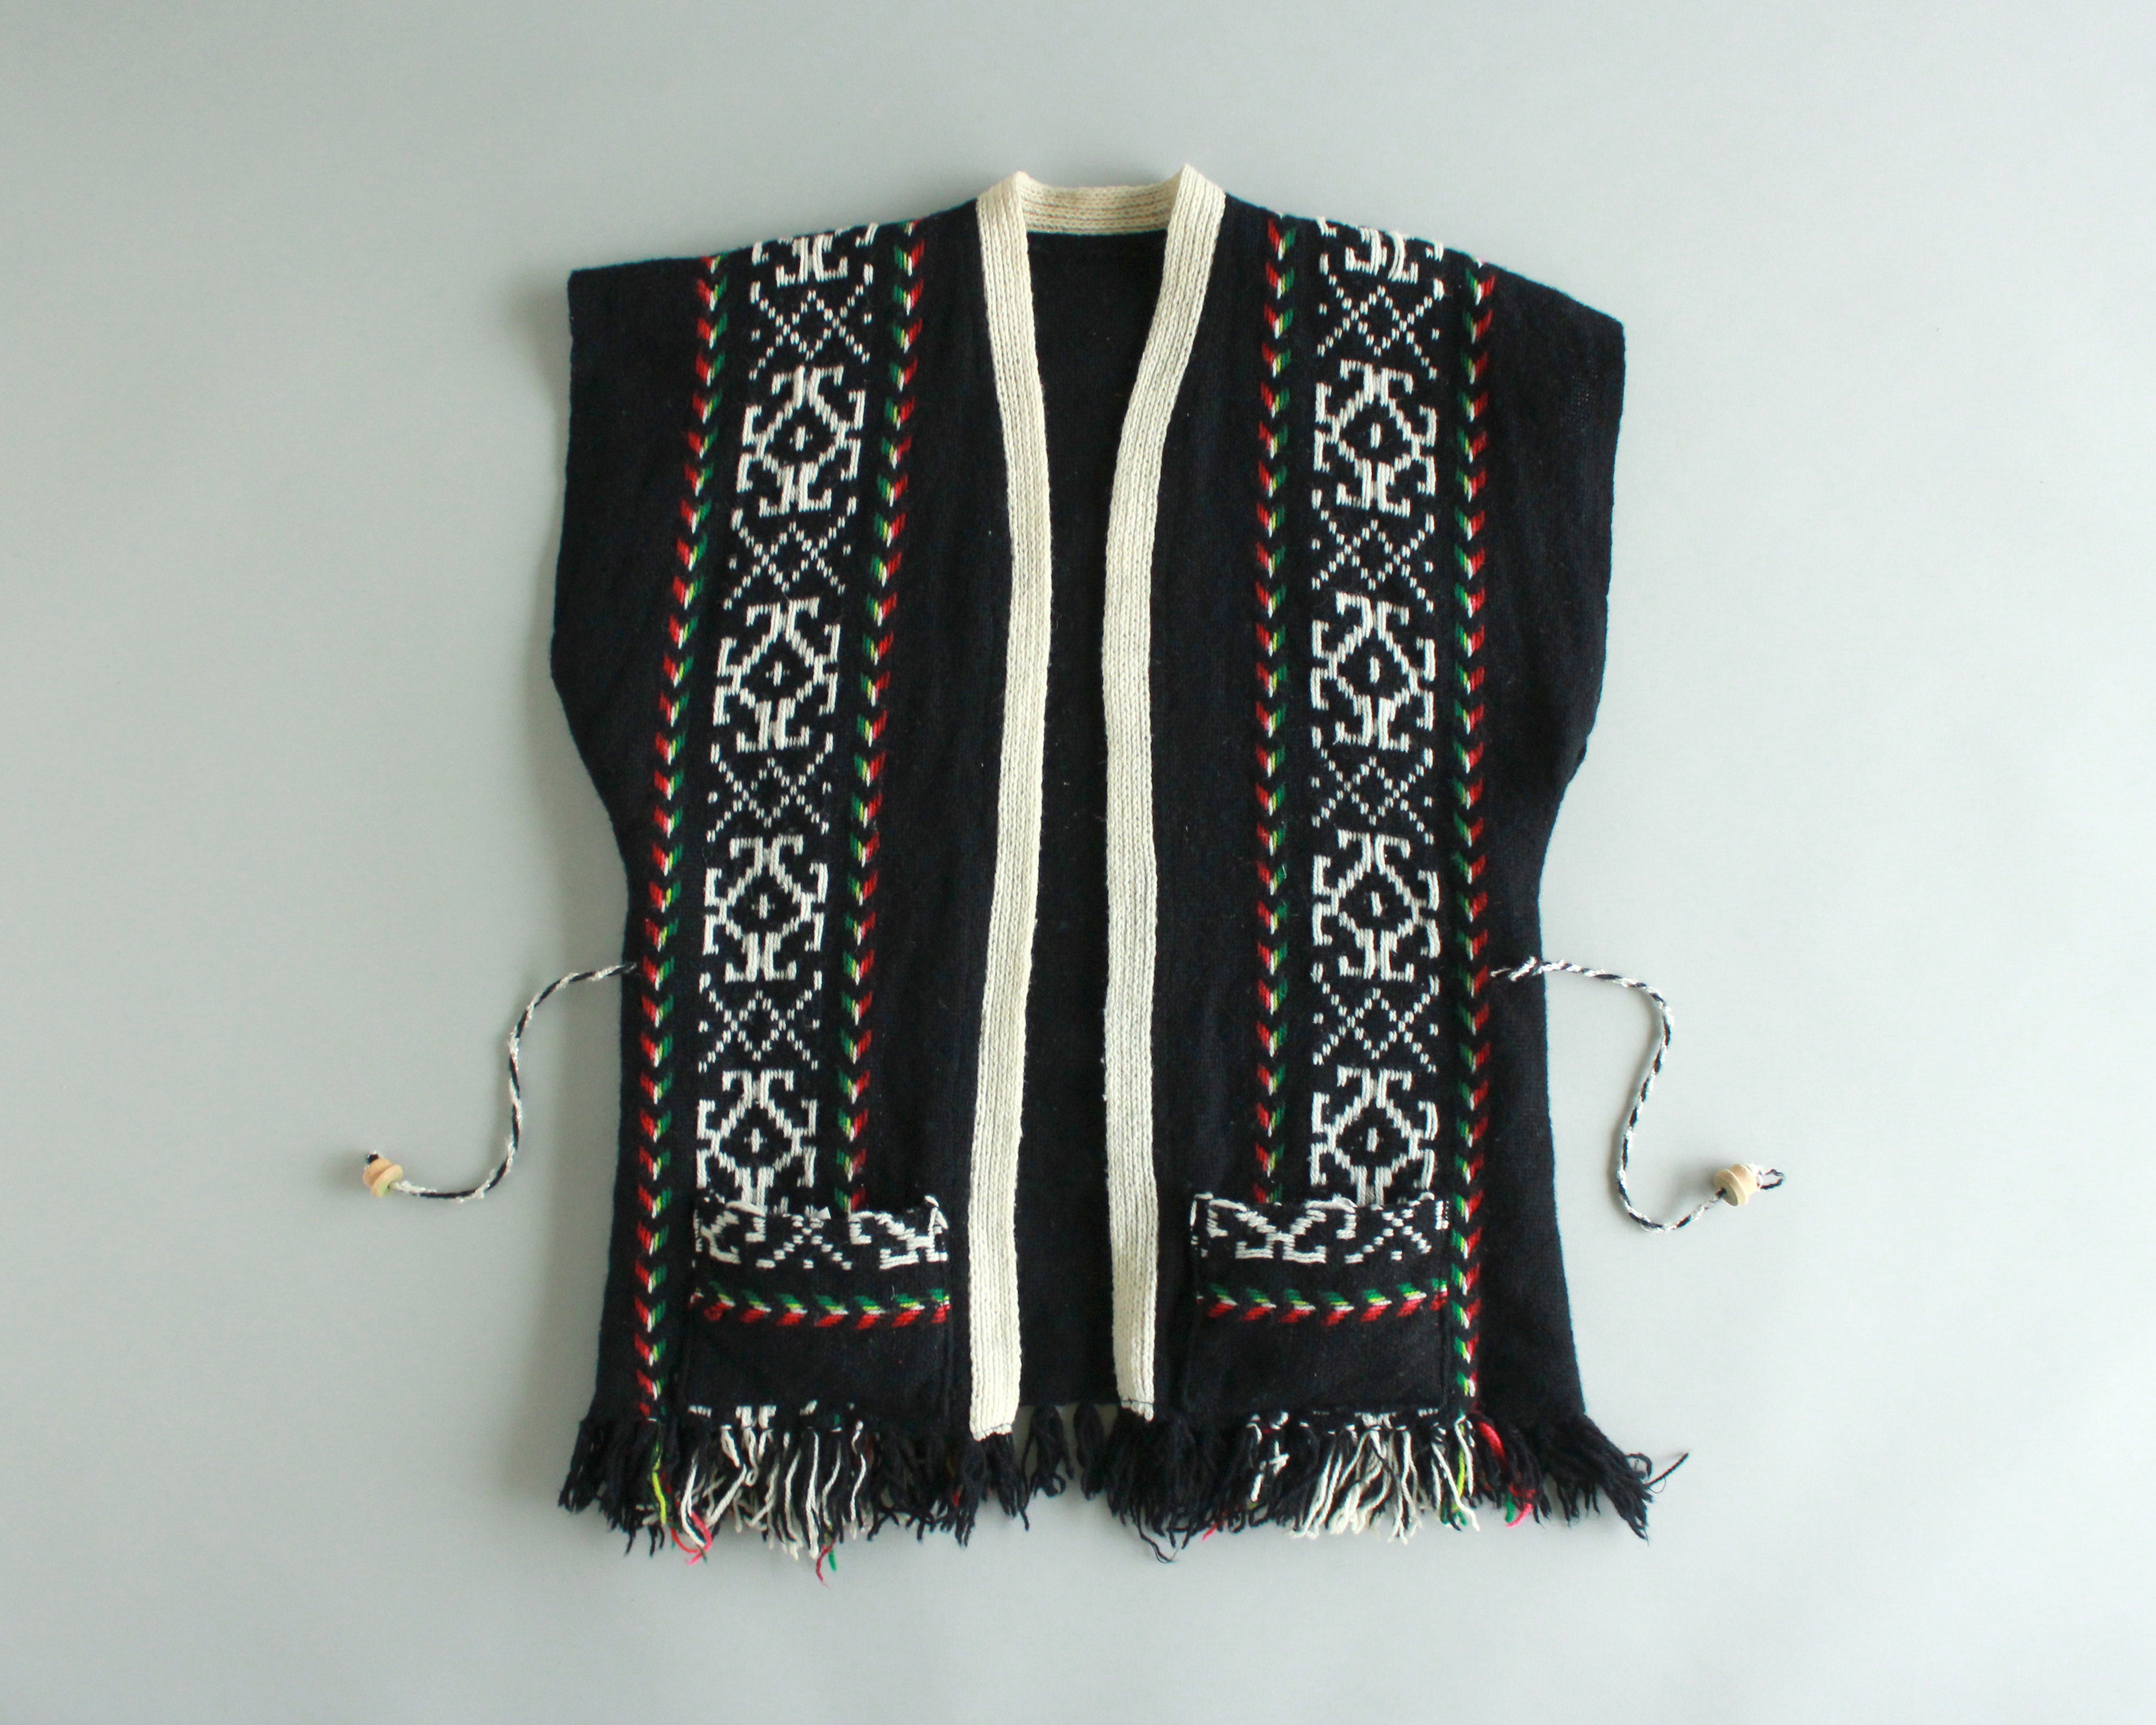 South American woven yarn sweater vest in black and white